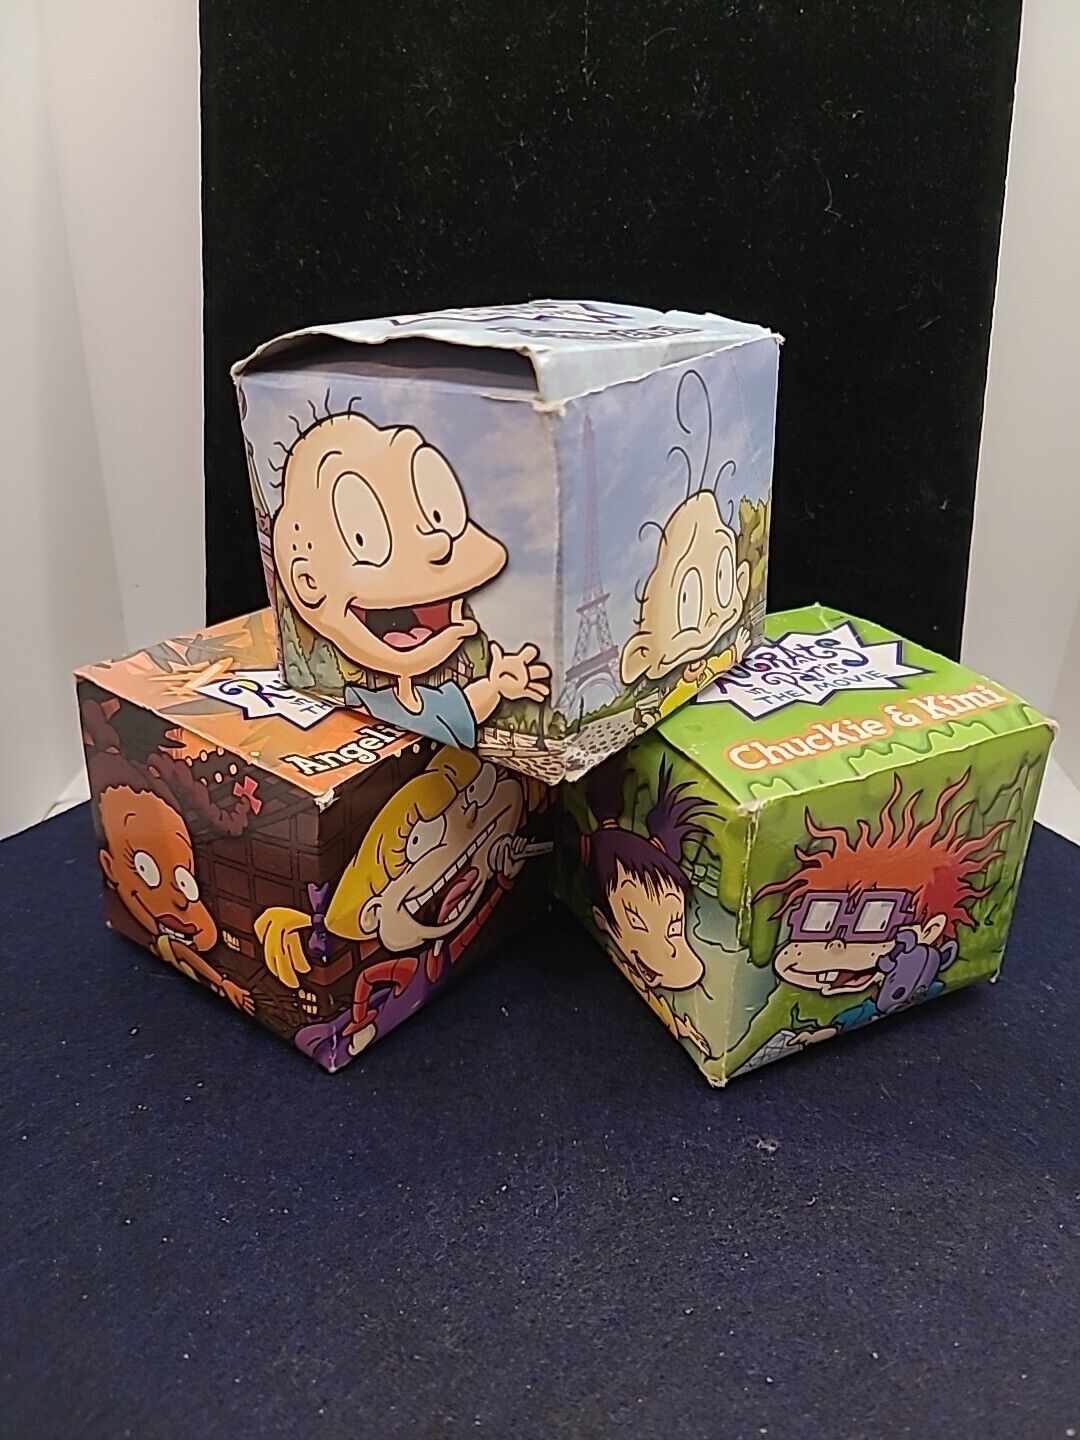 Vintage Rugrats Watches, Set of 3 - 2000 Rugrats Memorabilia Brand New in Box |